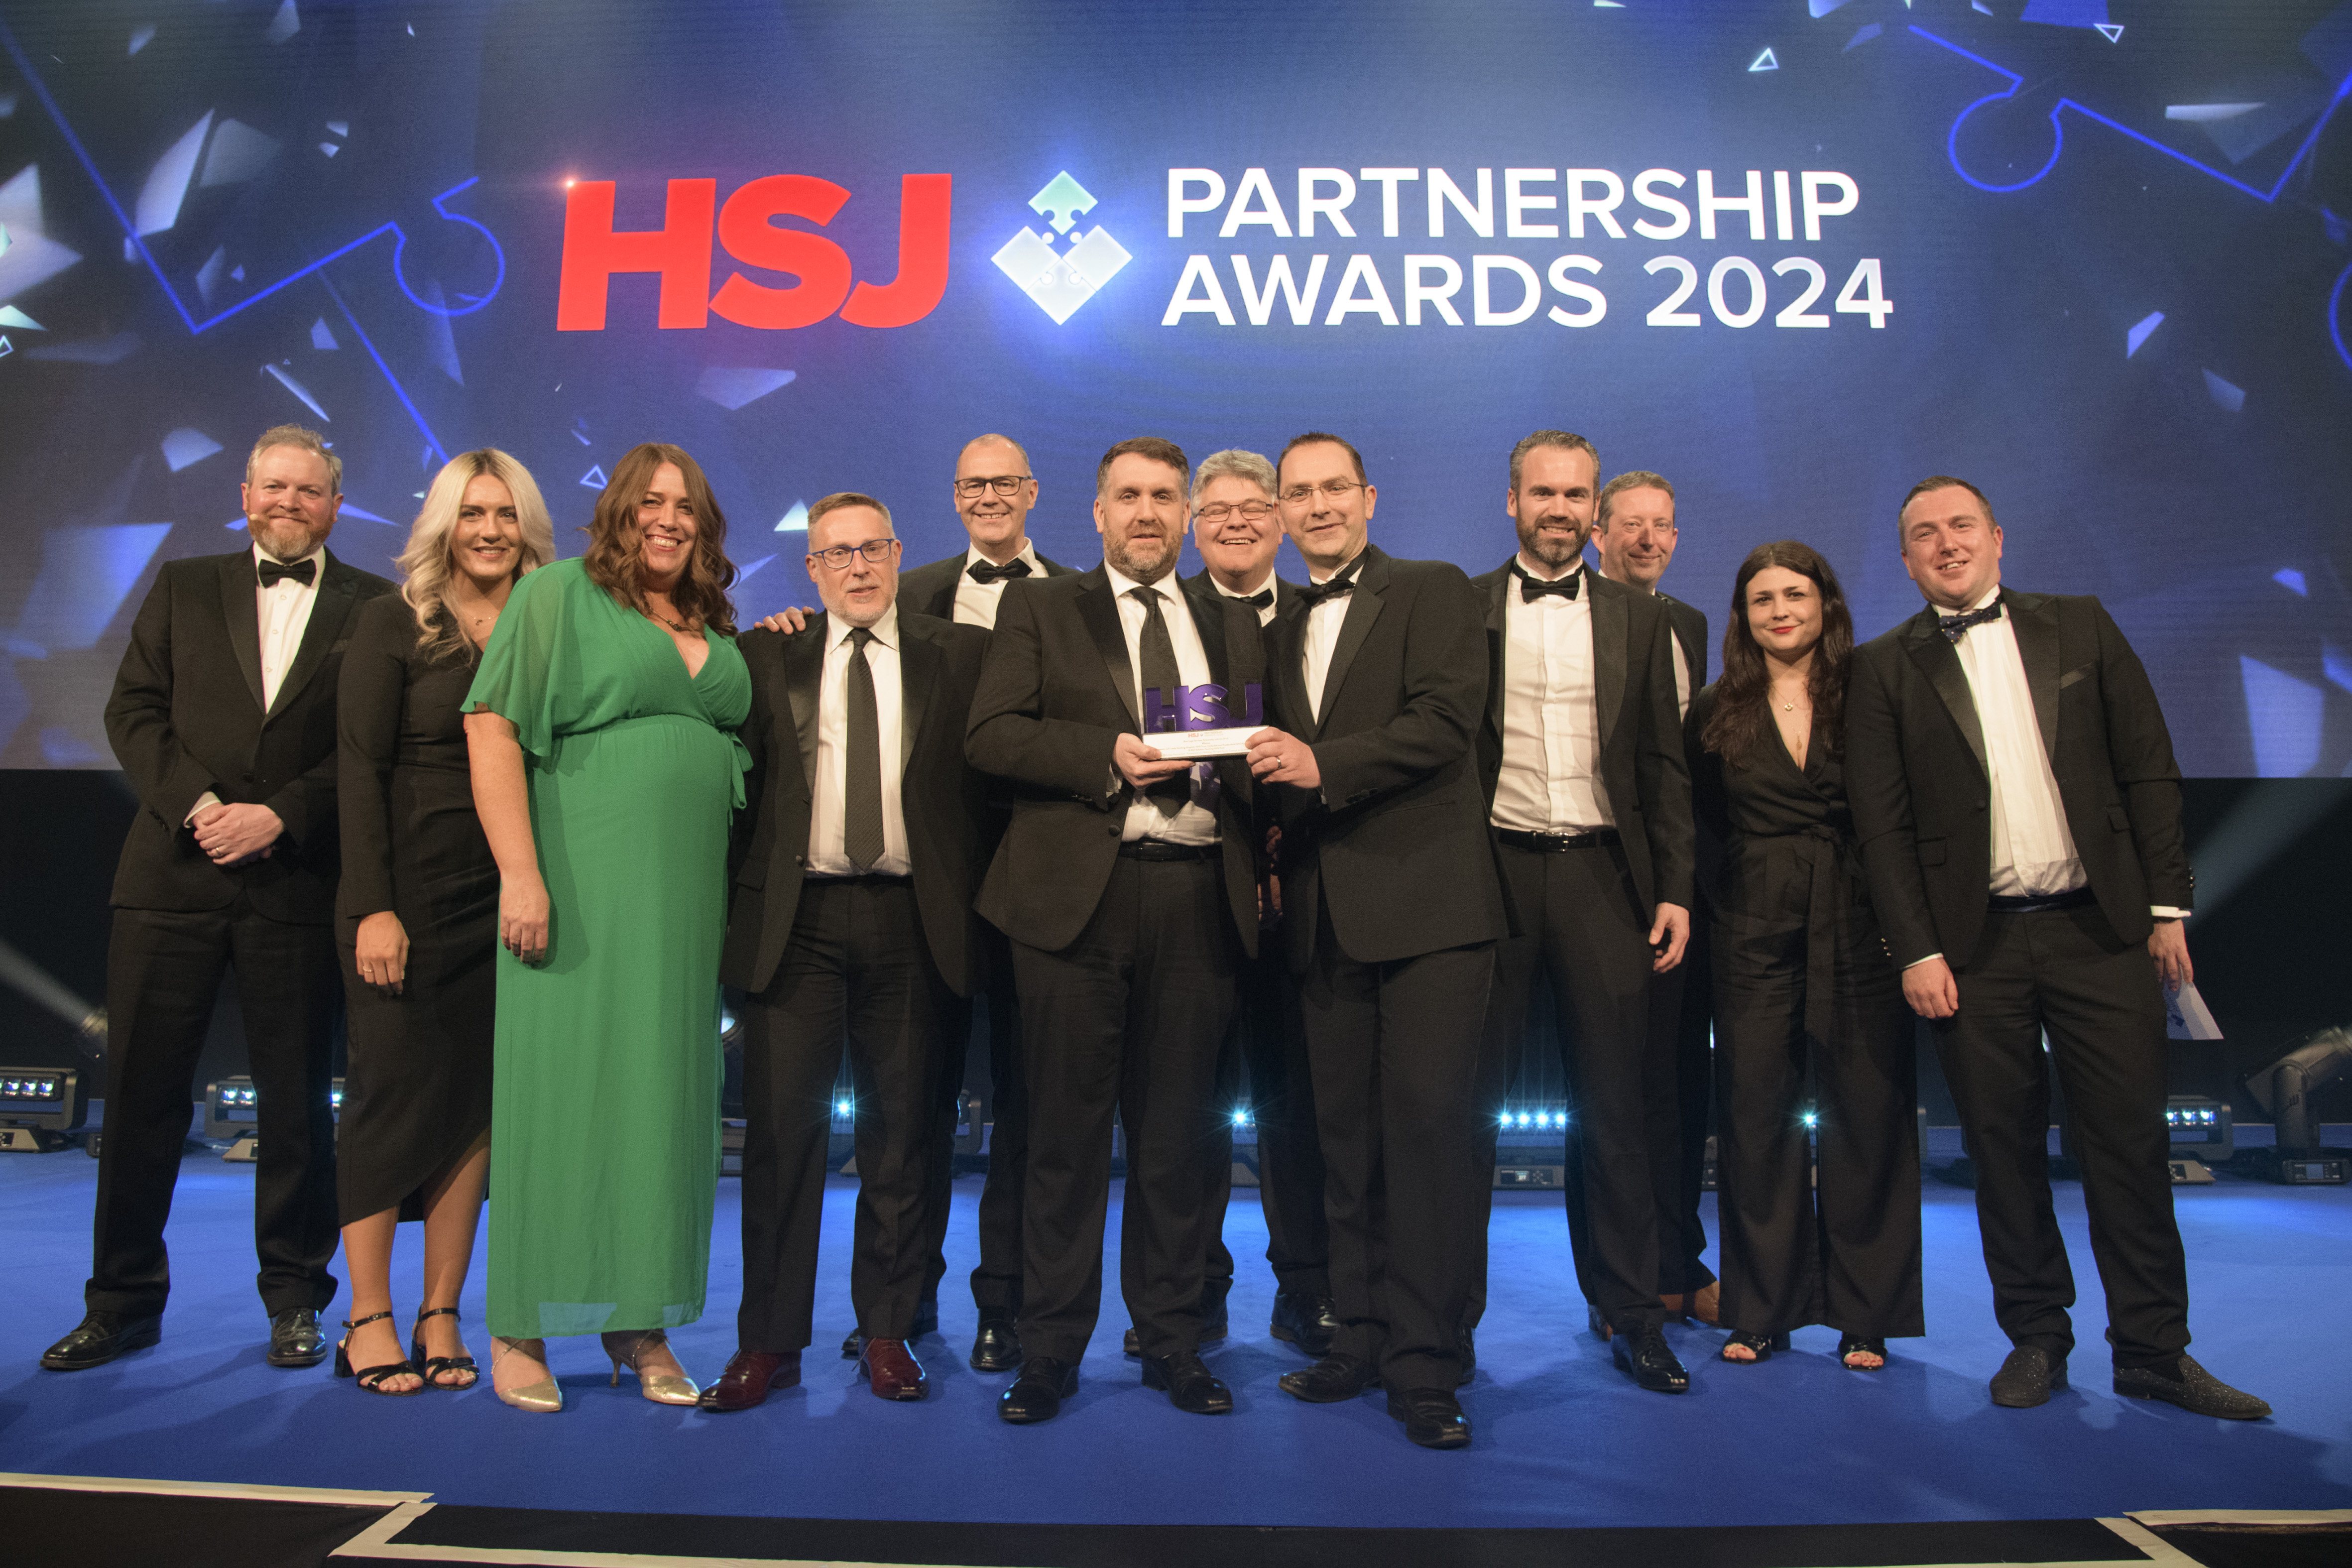 WYAAT and Hempsons LLP awarded ‘Best Legal Services Partnership with the NHS’ at 2024 HSJ Awards